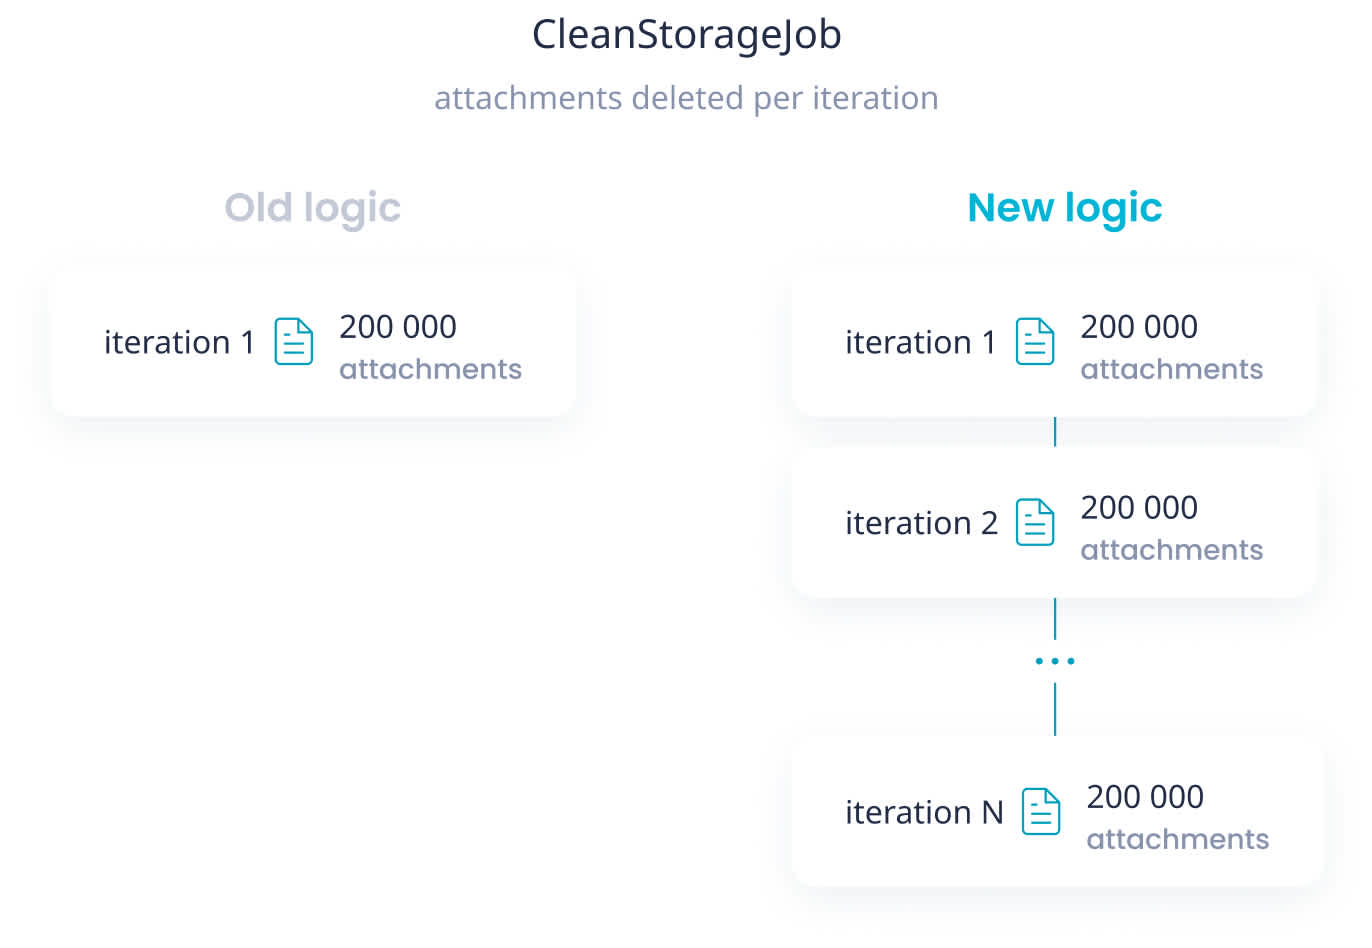 The new logic of the CleanStorage in our test automation results dashboard